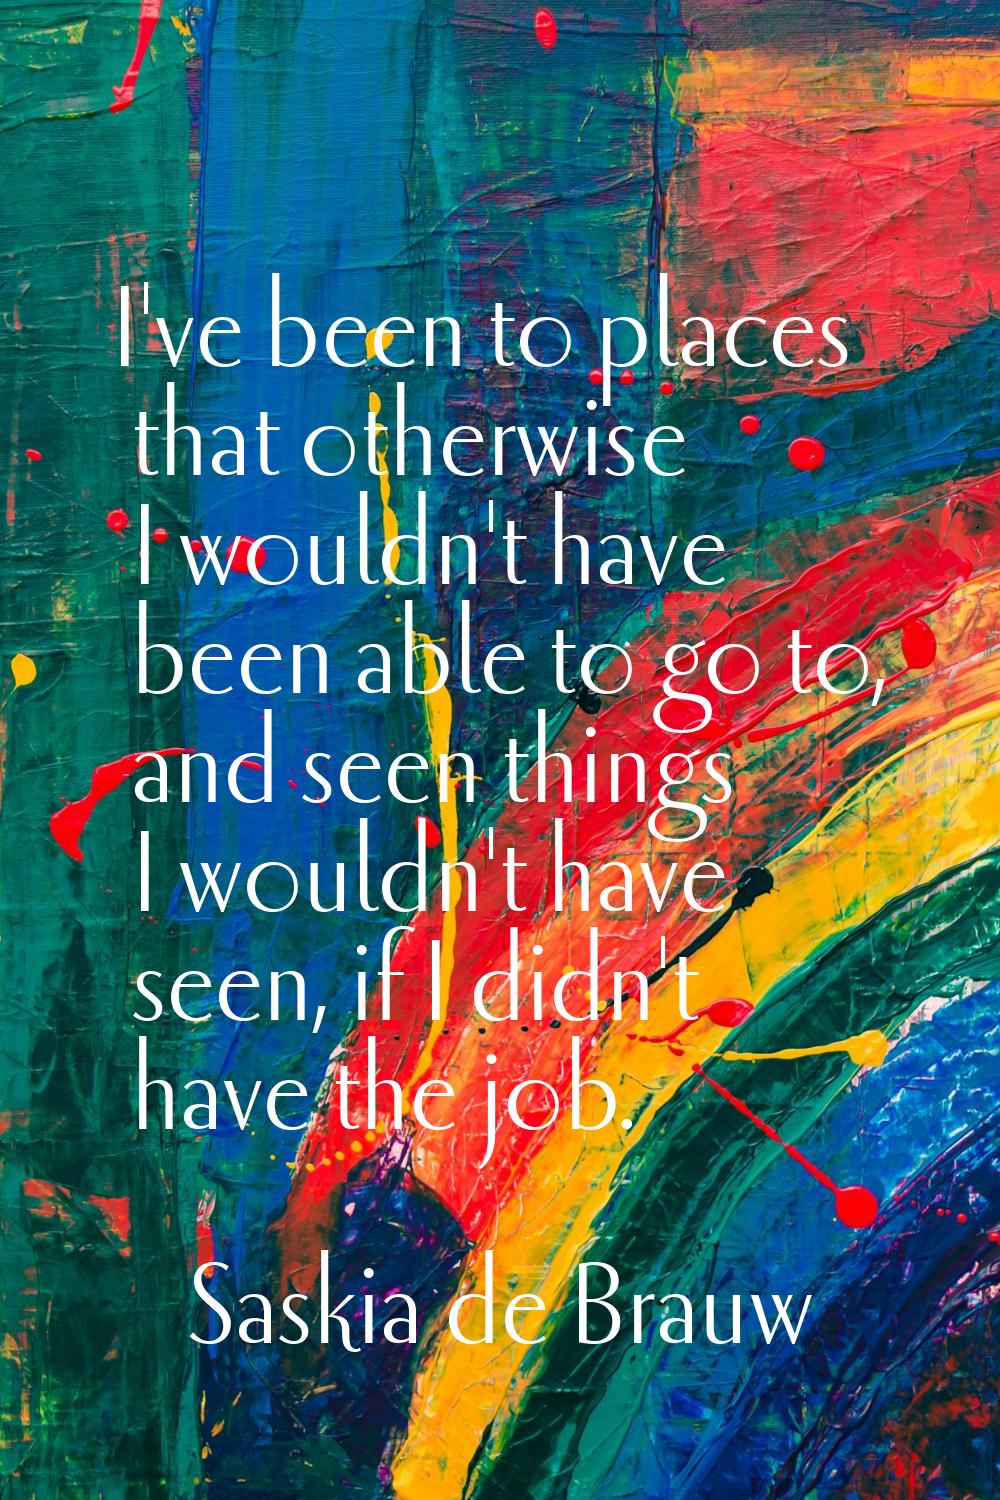 I've been to places that otherwise I wouldn't have been able to go to, and seen things I wouldn't h